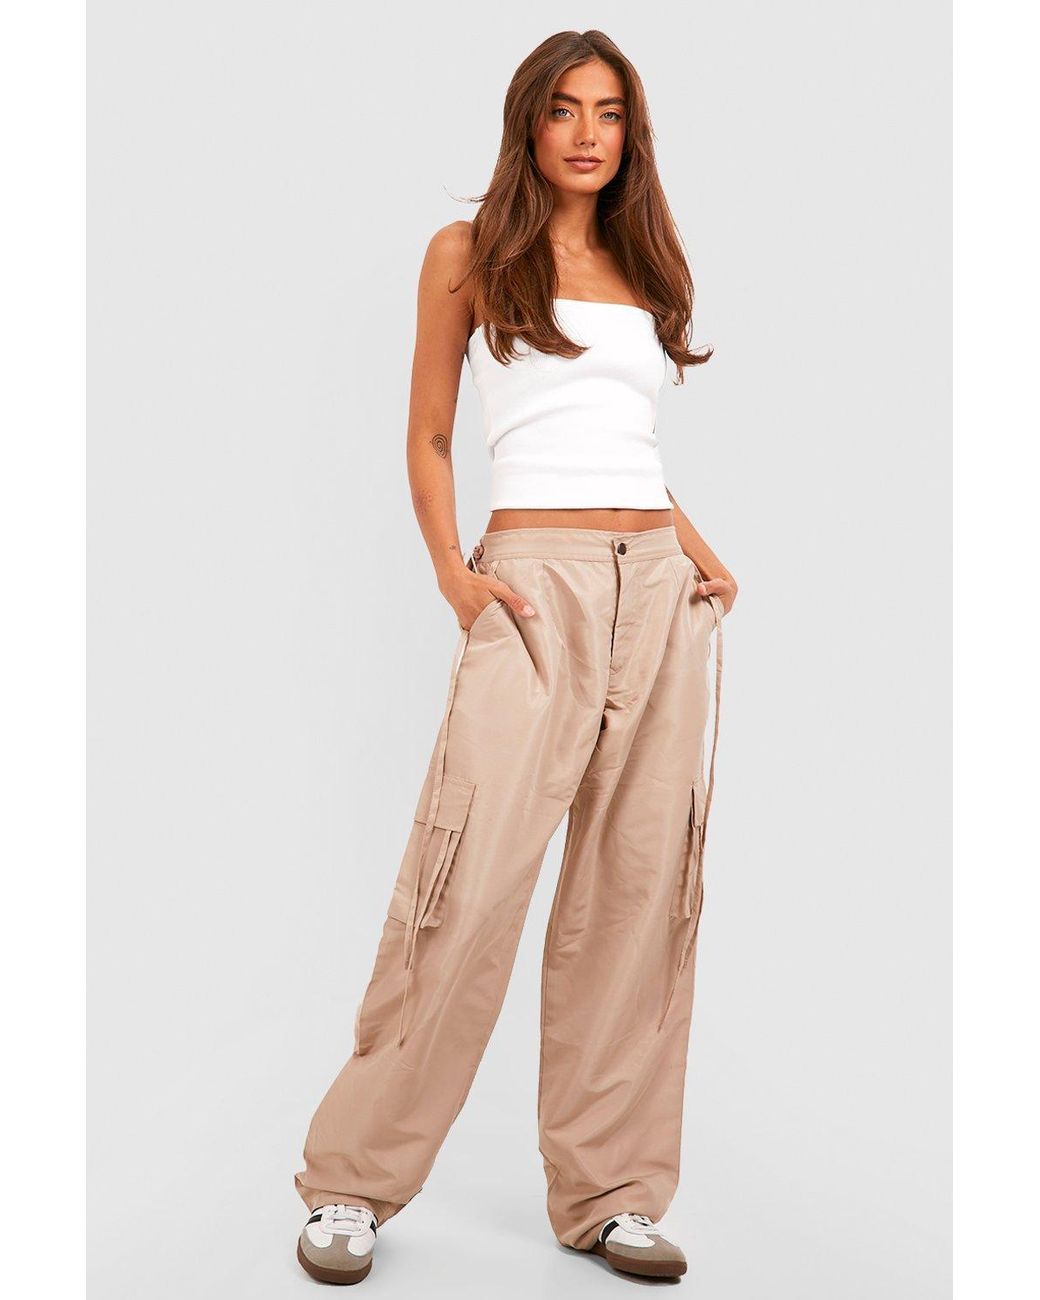 Boohoo High Rise Wide Leg Toggle Cargo Pants in White | Lyst